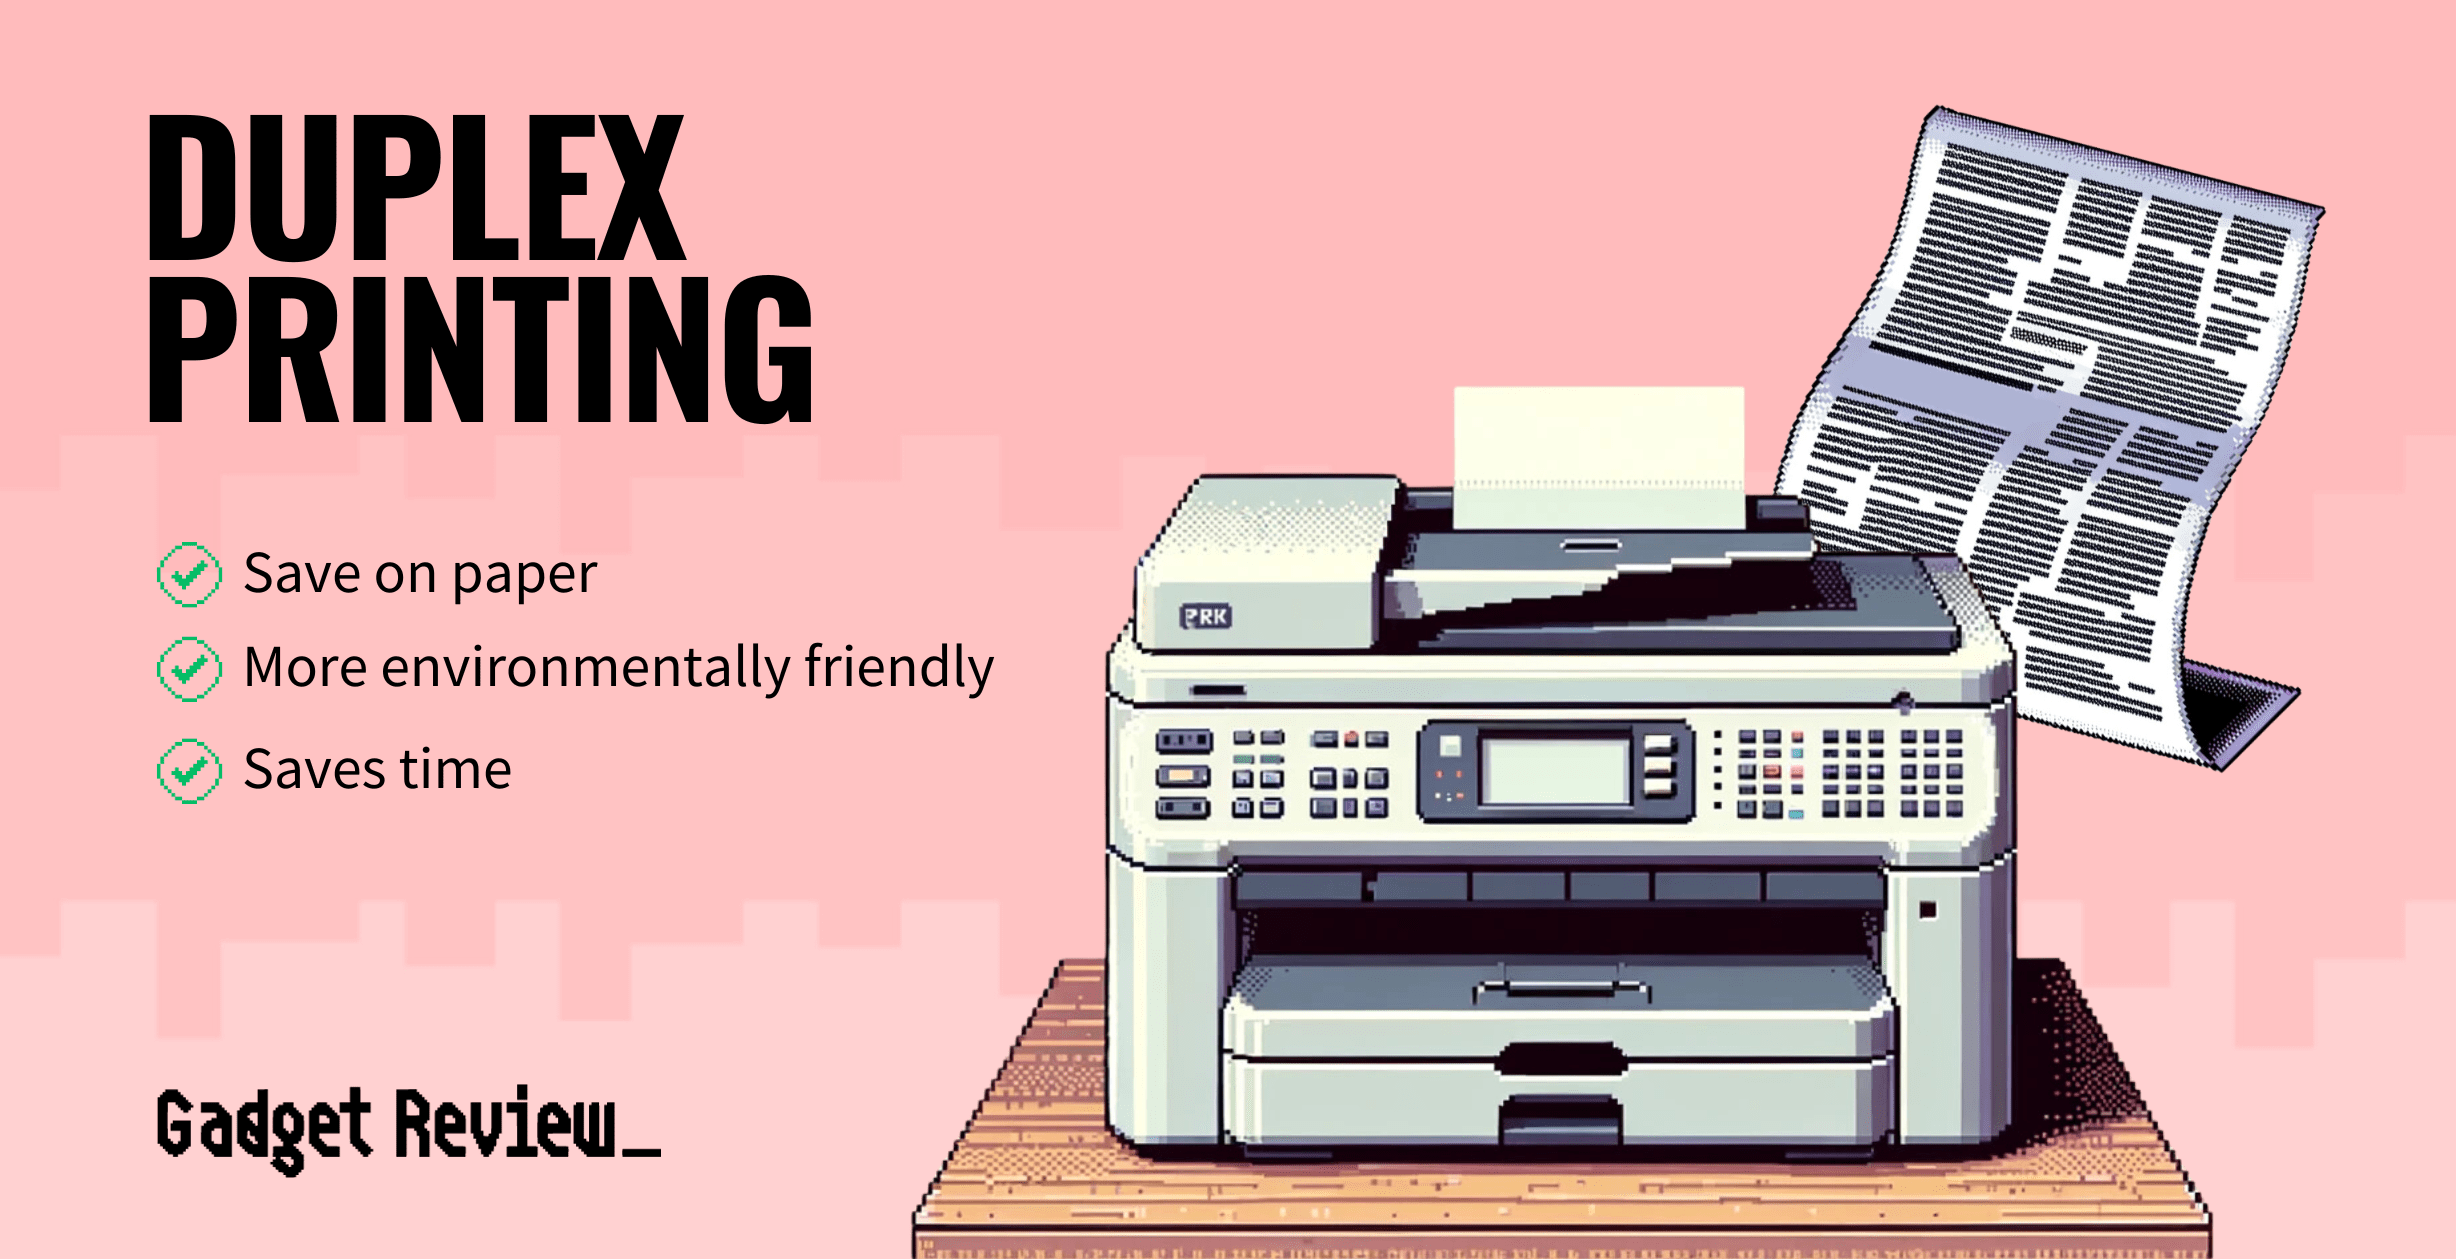 What is Duplex Printing?